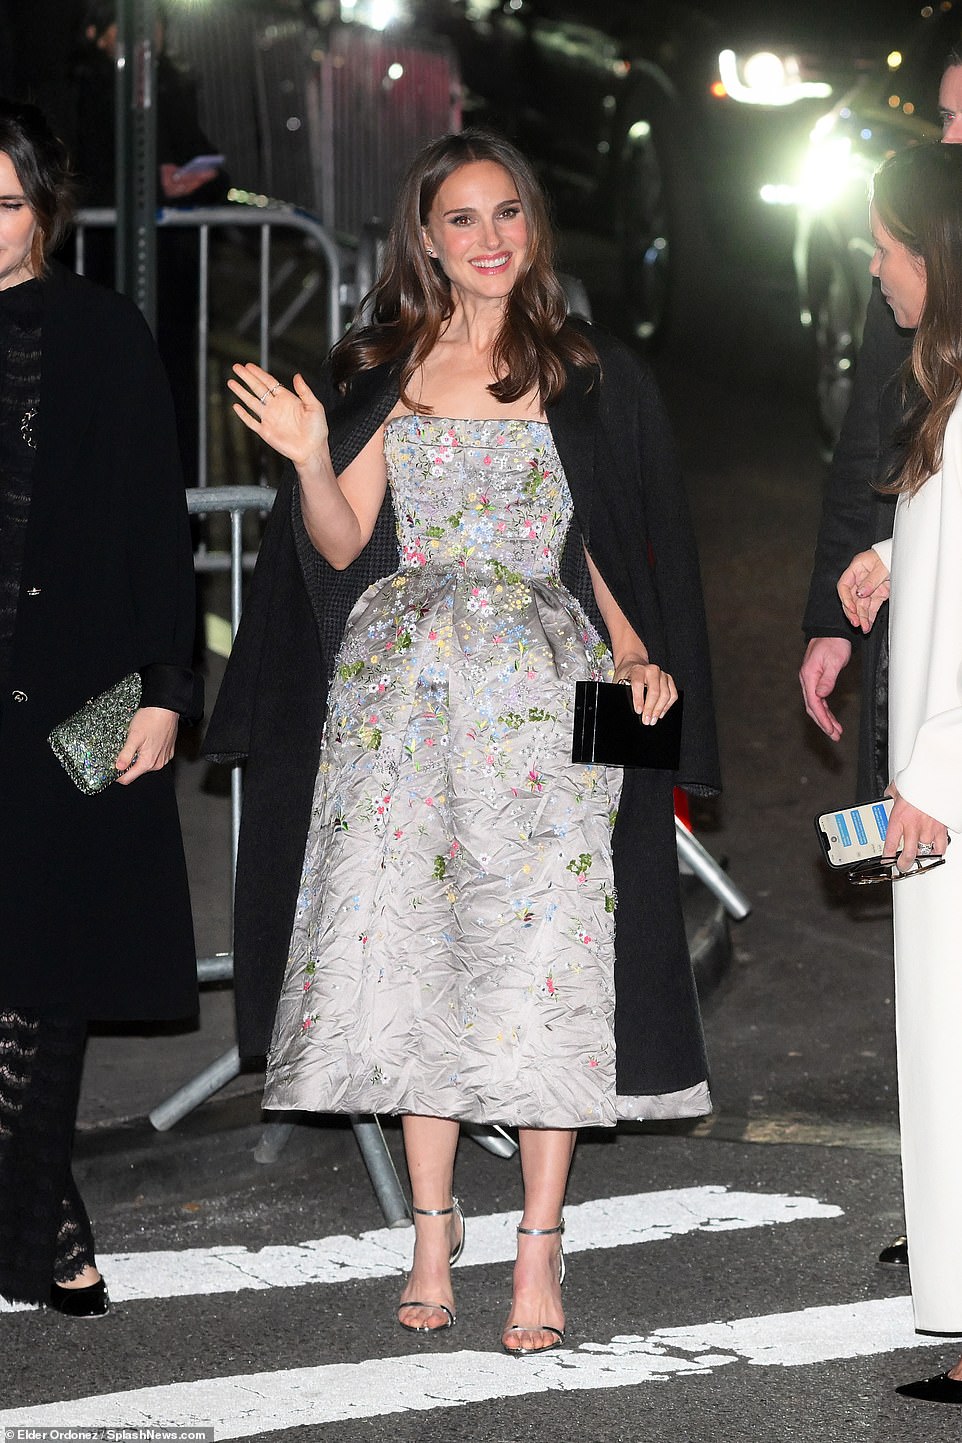 Friendly: Portman waved to fans as she arrived to the awards show